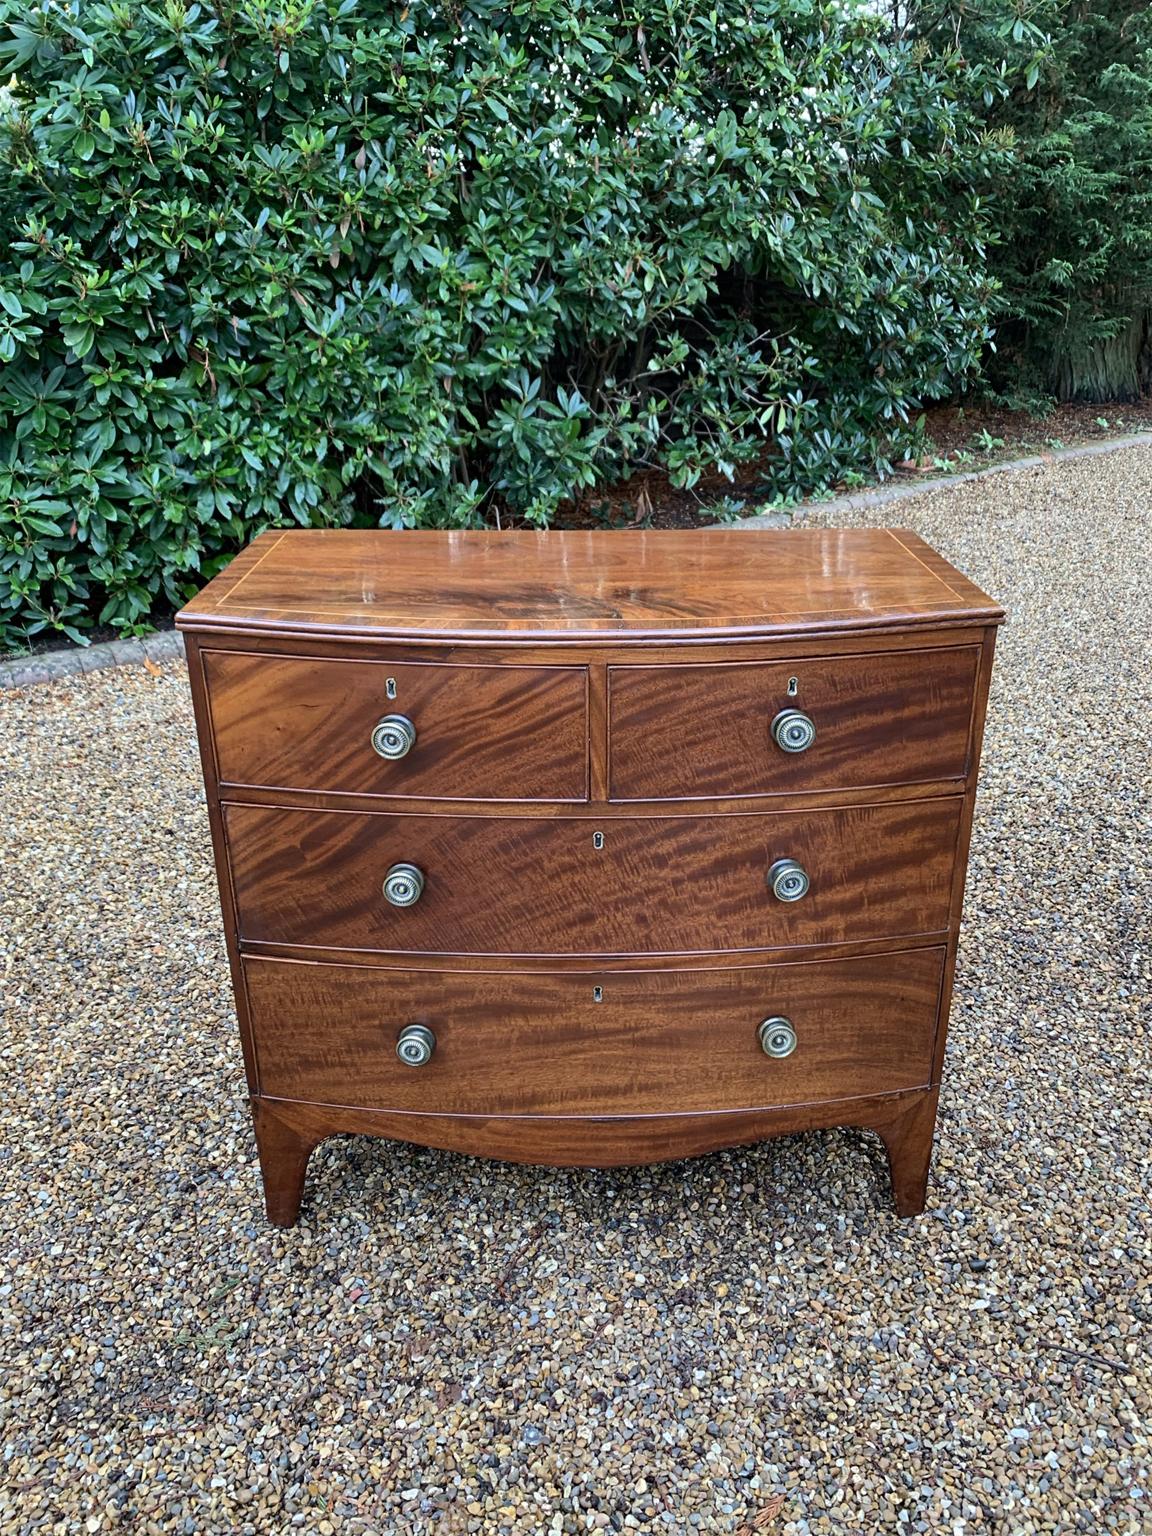 19th Century Georgian / Regency Mahogany bowfront chest of drawers, with two short and two long graduated oak lined drawers with original round brass handles, on splayed feet.

Circa: 1820

Dimensions:
height: 33.5 inches – 85 cms
width: 35.5